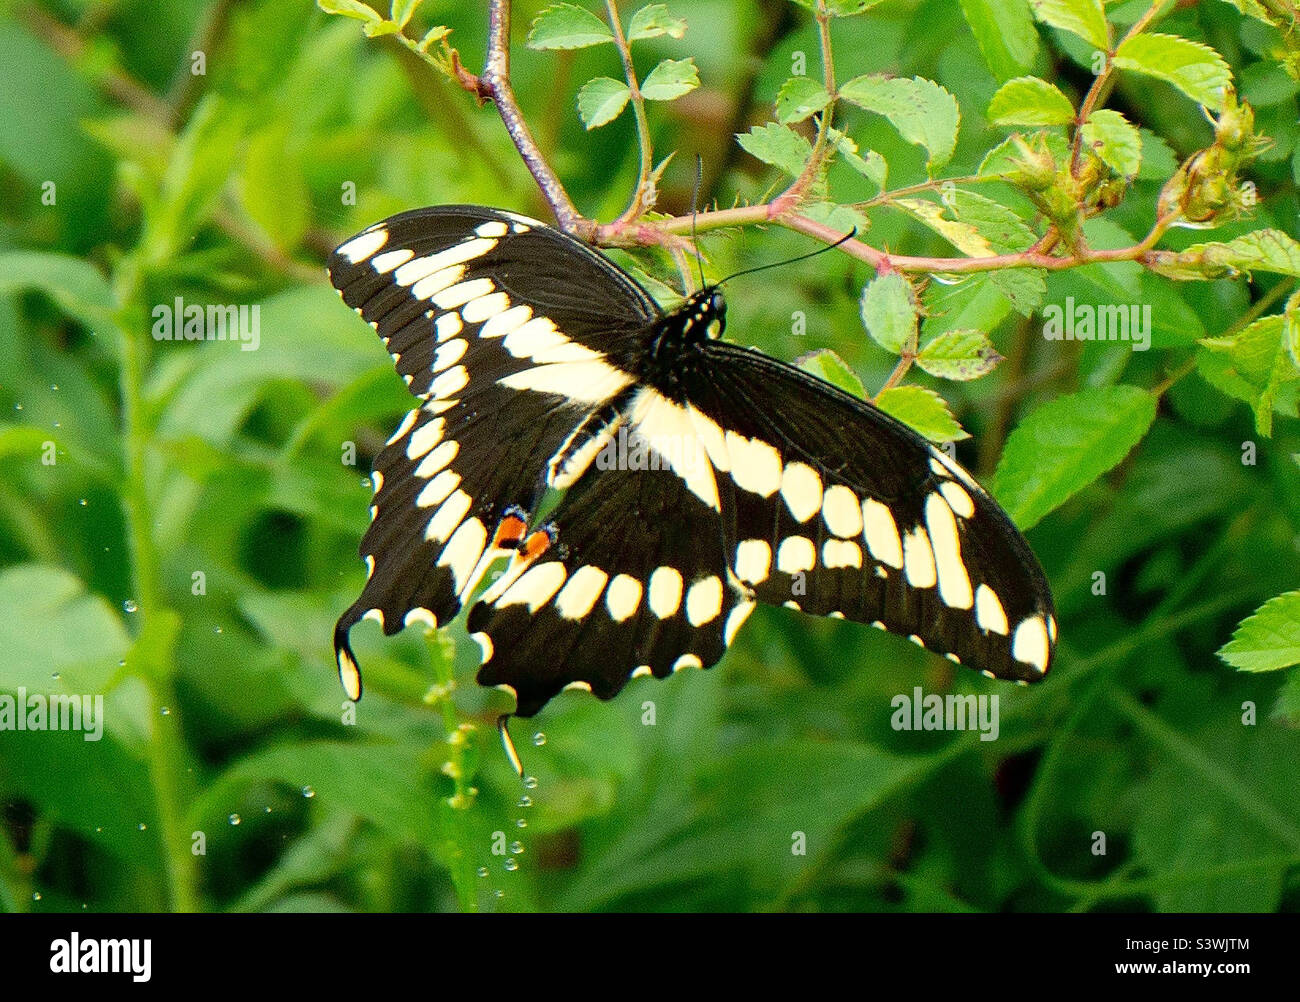 Giant swallowtail butterfly Banque D'Images